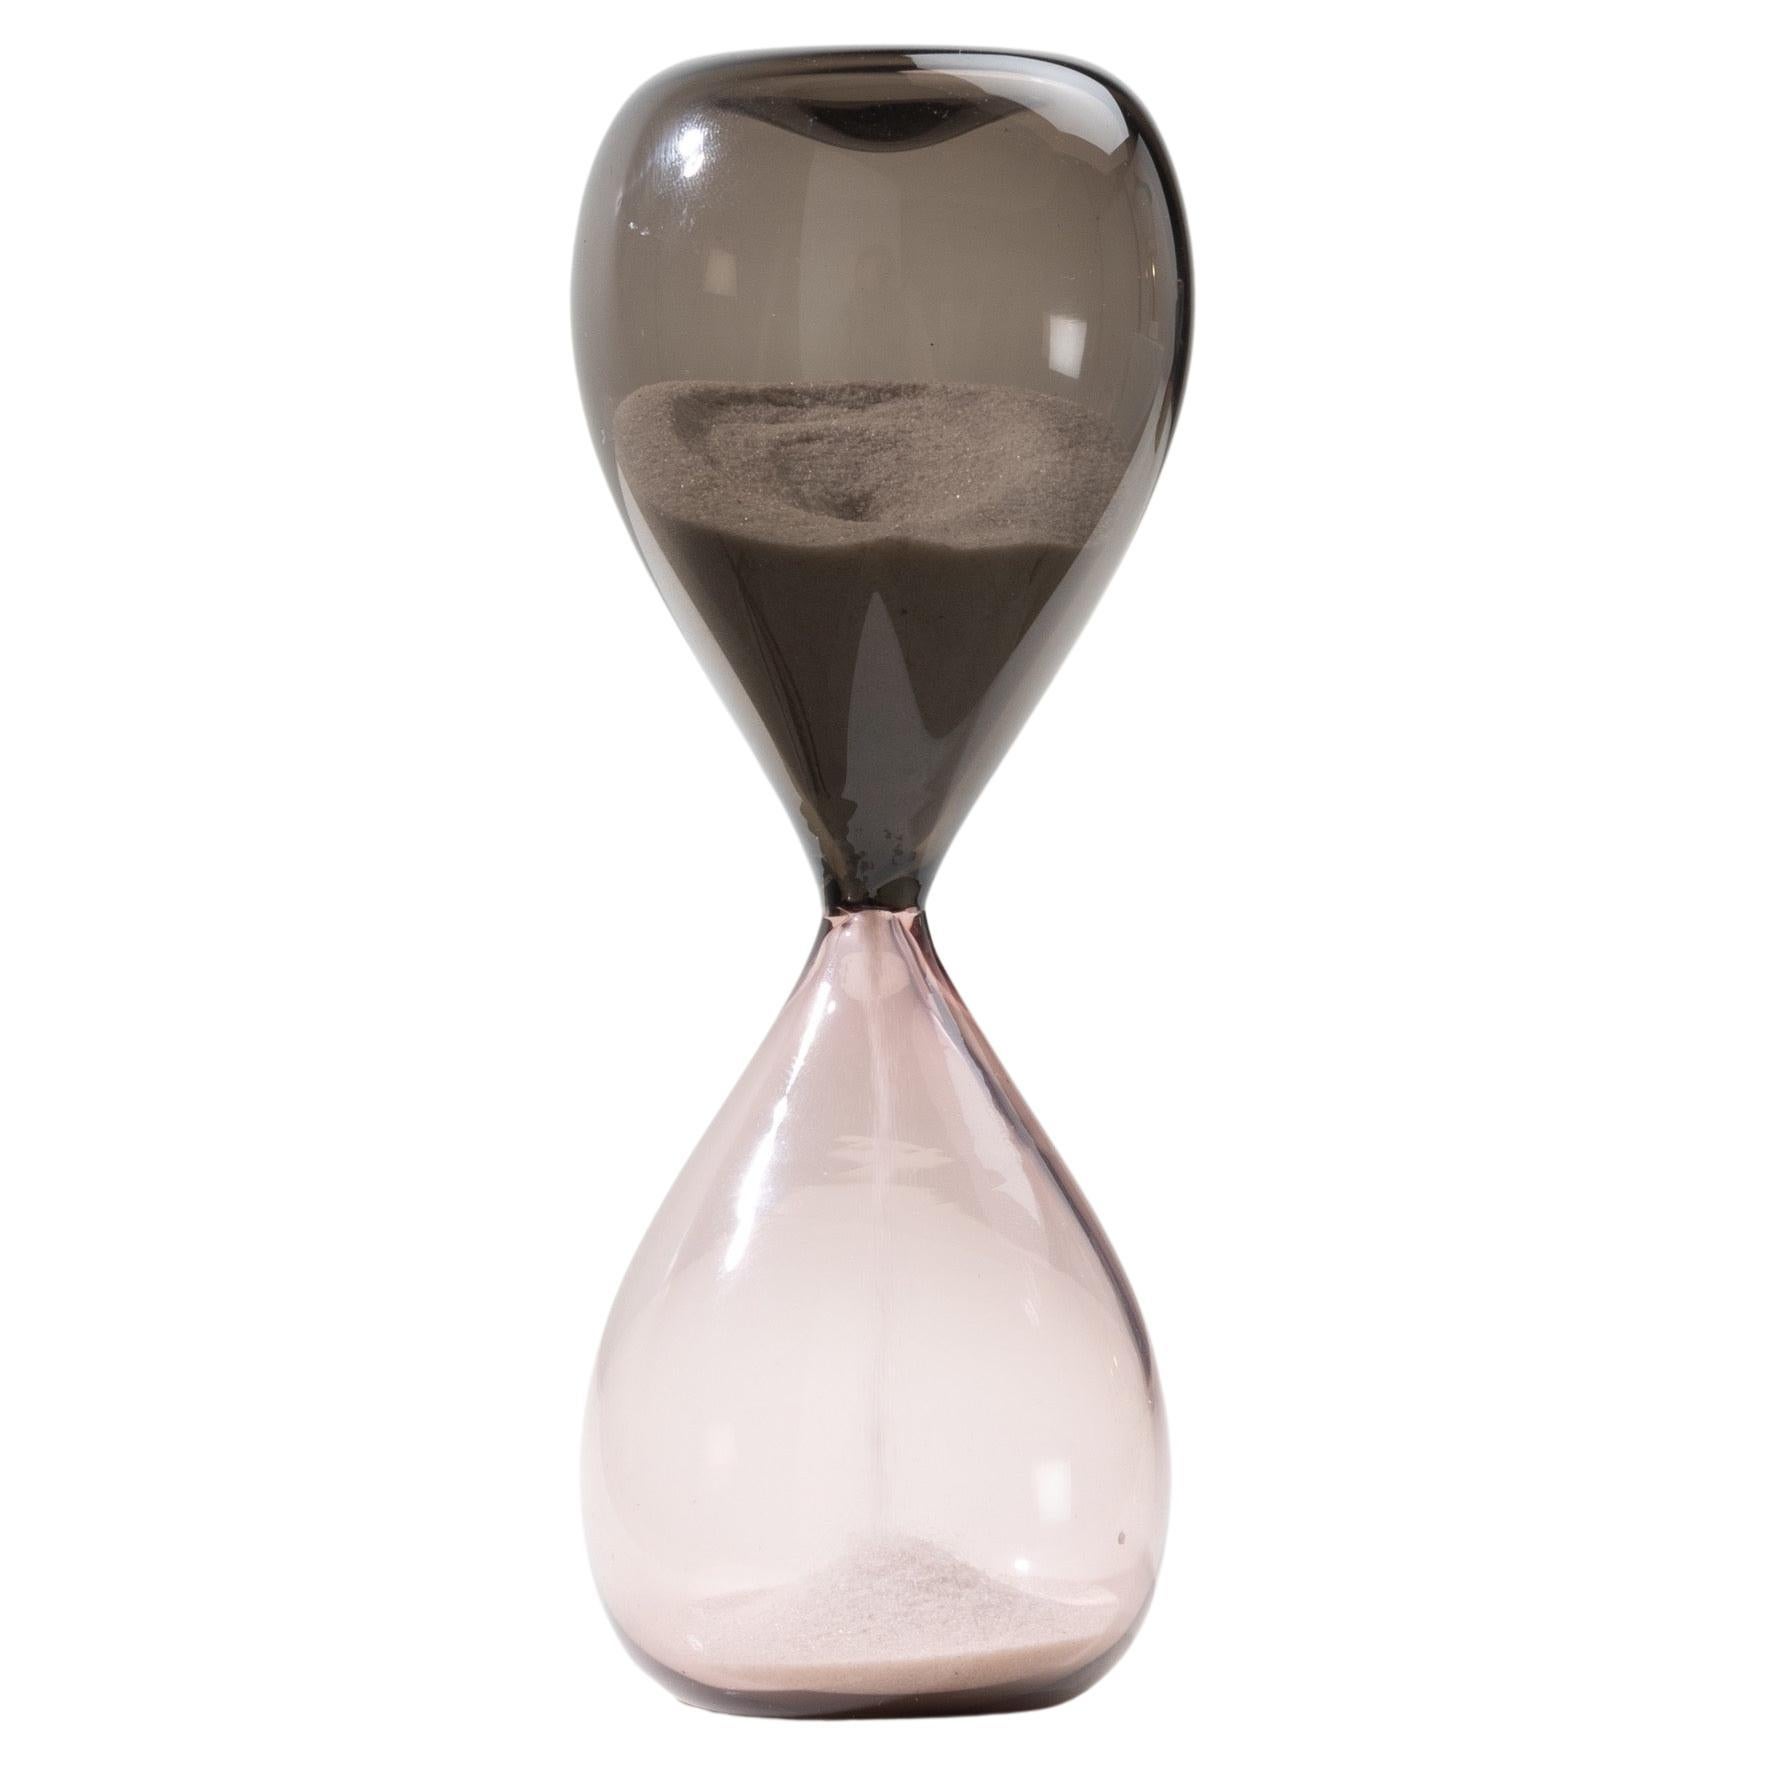 Blown Glass Hourglass 'from the Clessidra Series' by Paolo Venini, Italy